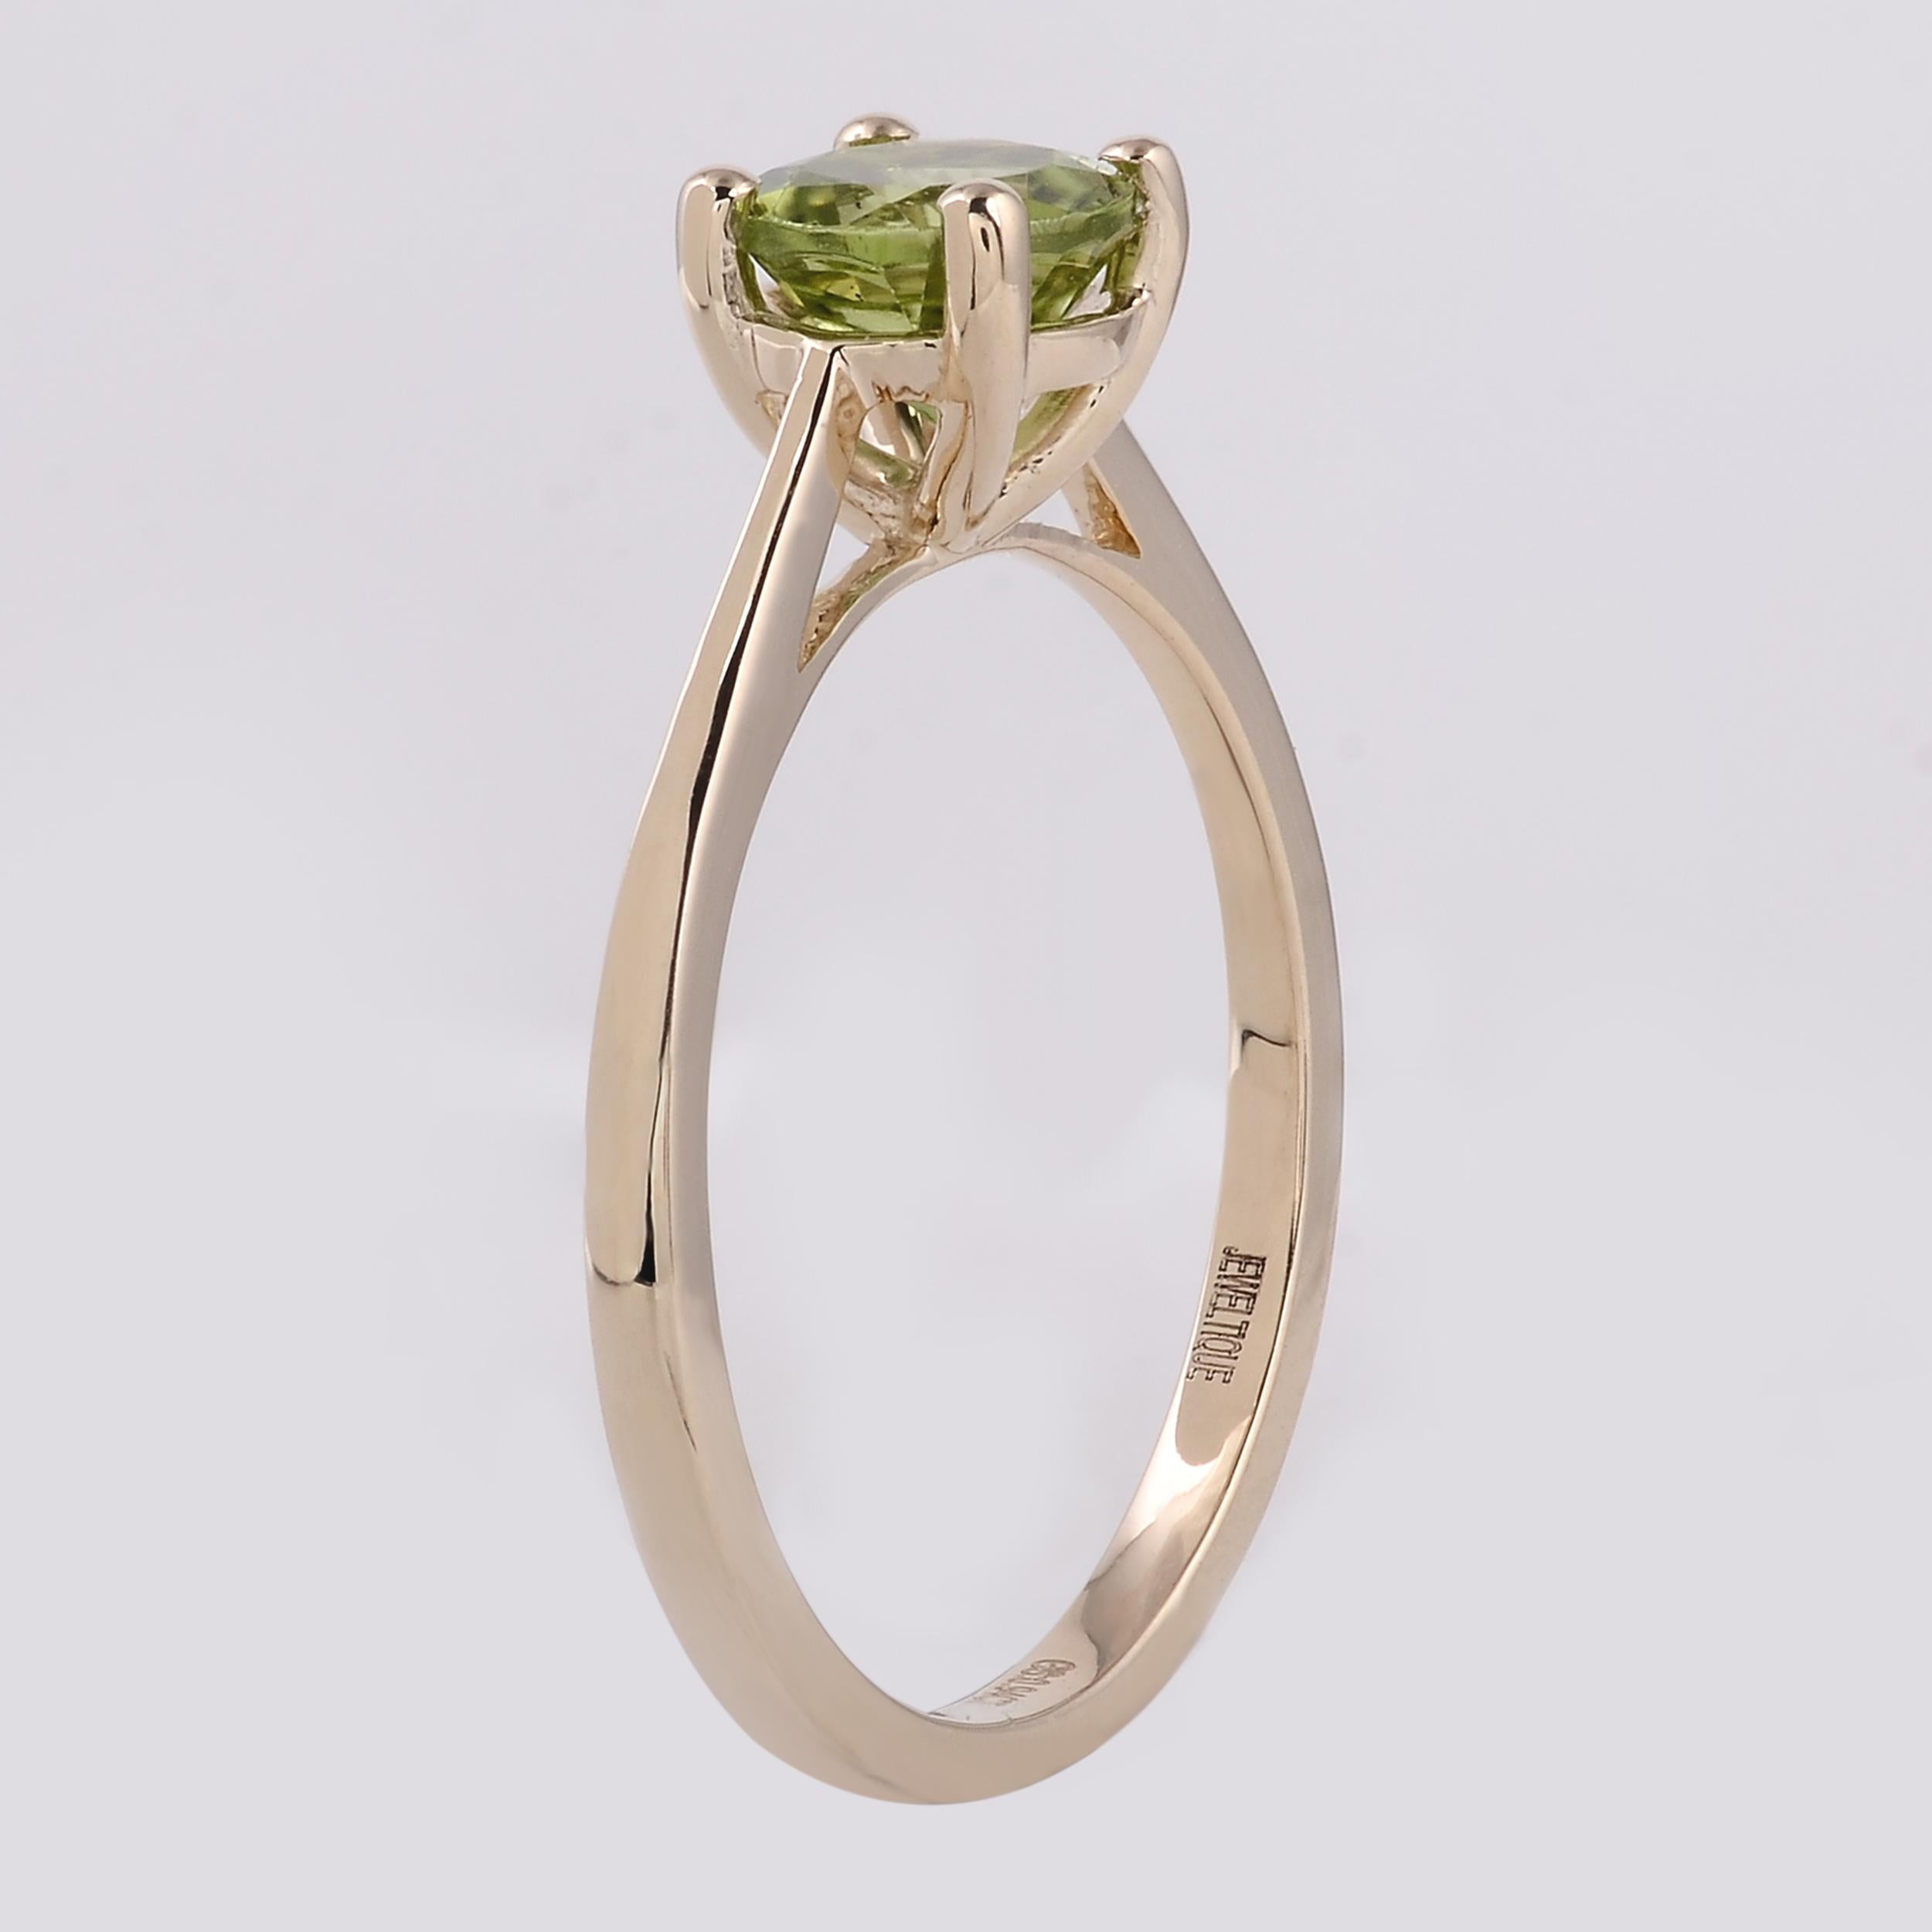 Brilliant Cut Elegant 14K Peridot Cocktail Ring, Size 7 - Stunning Statement Jewelry Piece For Sale